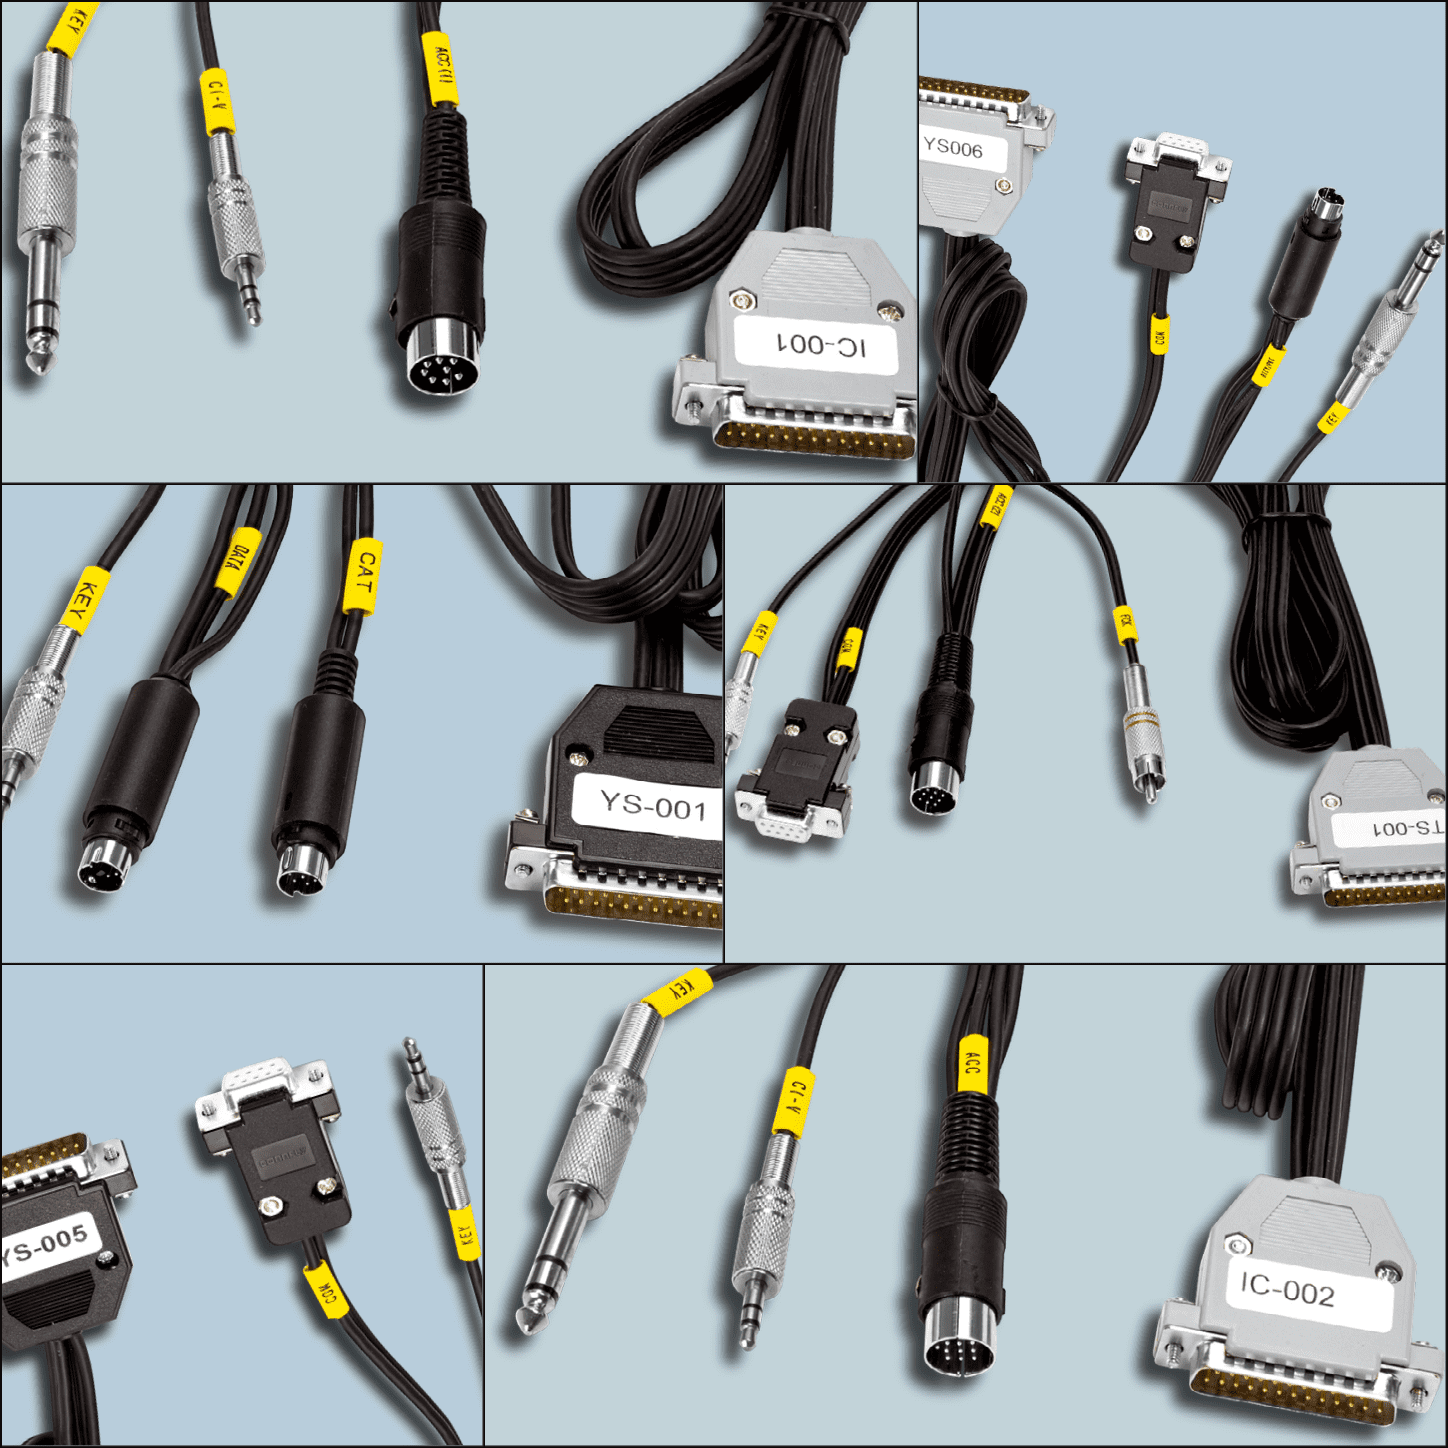 Transceiver cables for RigExpert interfaces